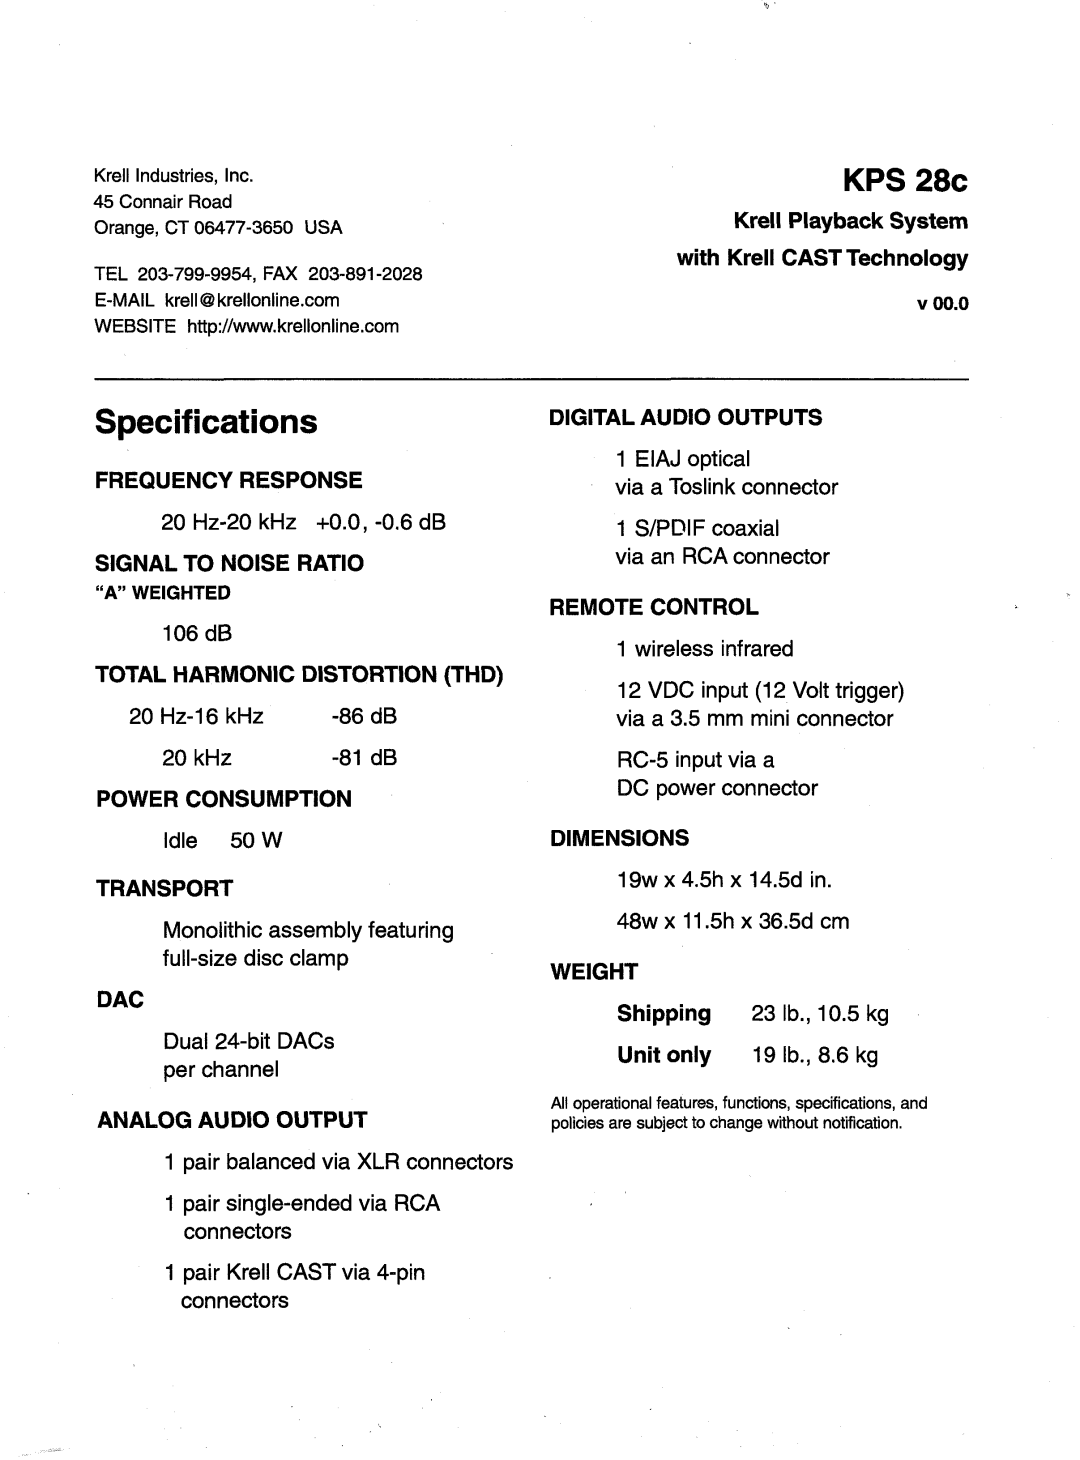 Krell Industries KPS 28c manual Specifications 